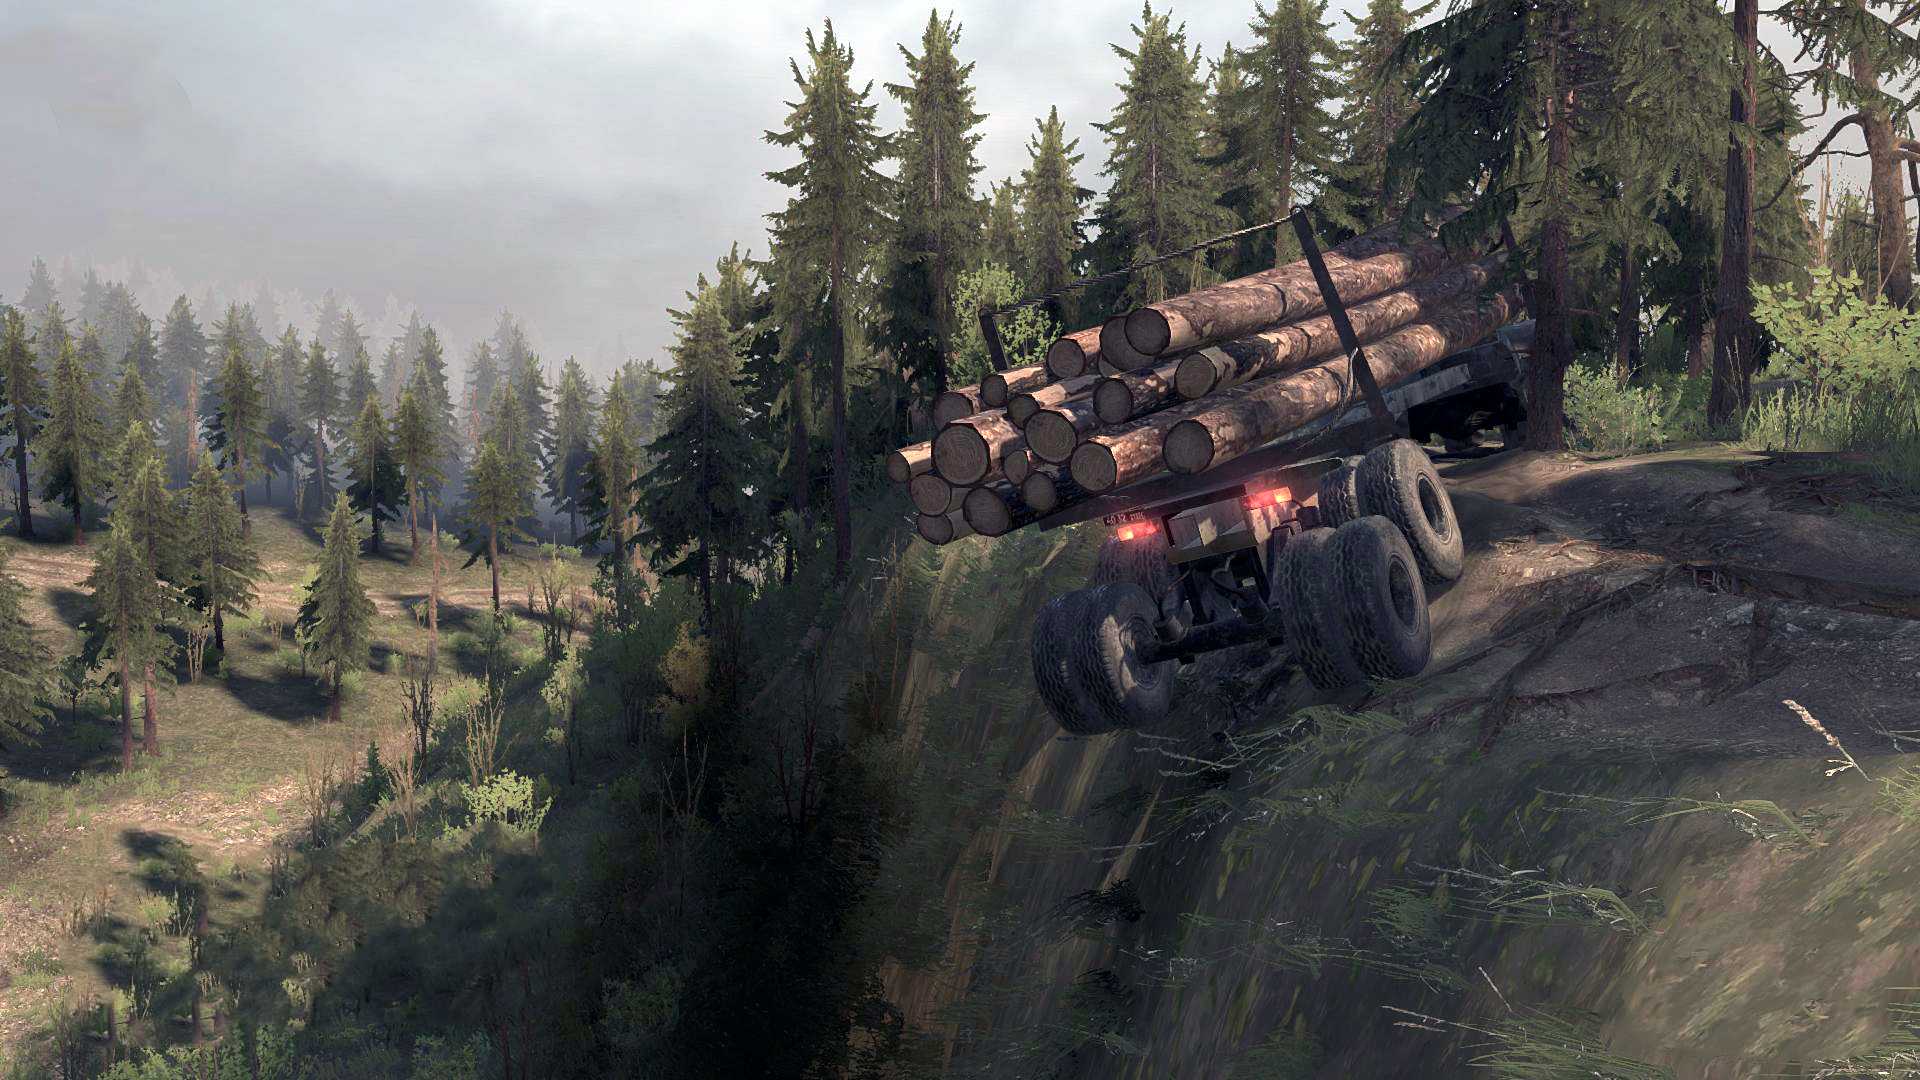 Expeditions a mudrunner game чит. MUDRUNNER Xbox 360. Spin Tires MUDRUNNER дождь. Spin Tires: MUDRUNNER моды БМП. MUDRUNNER системные требования.